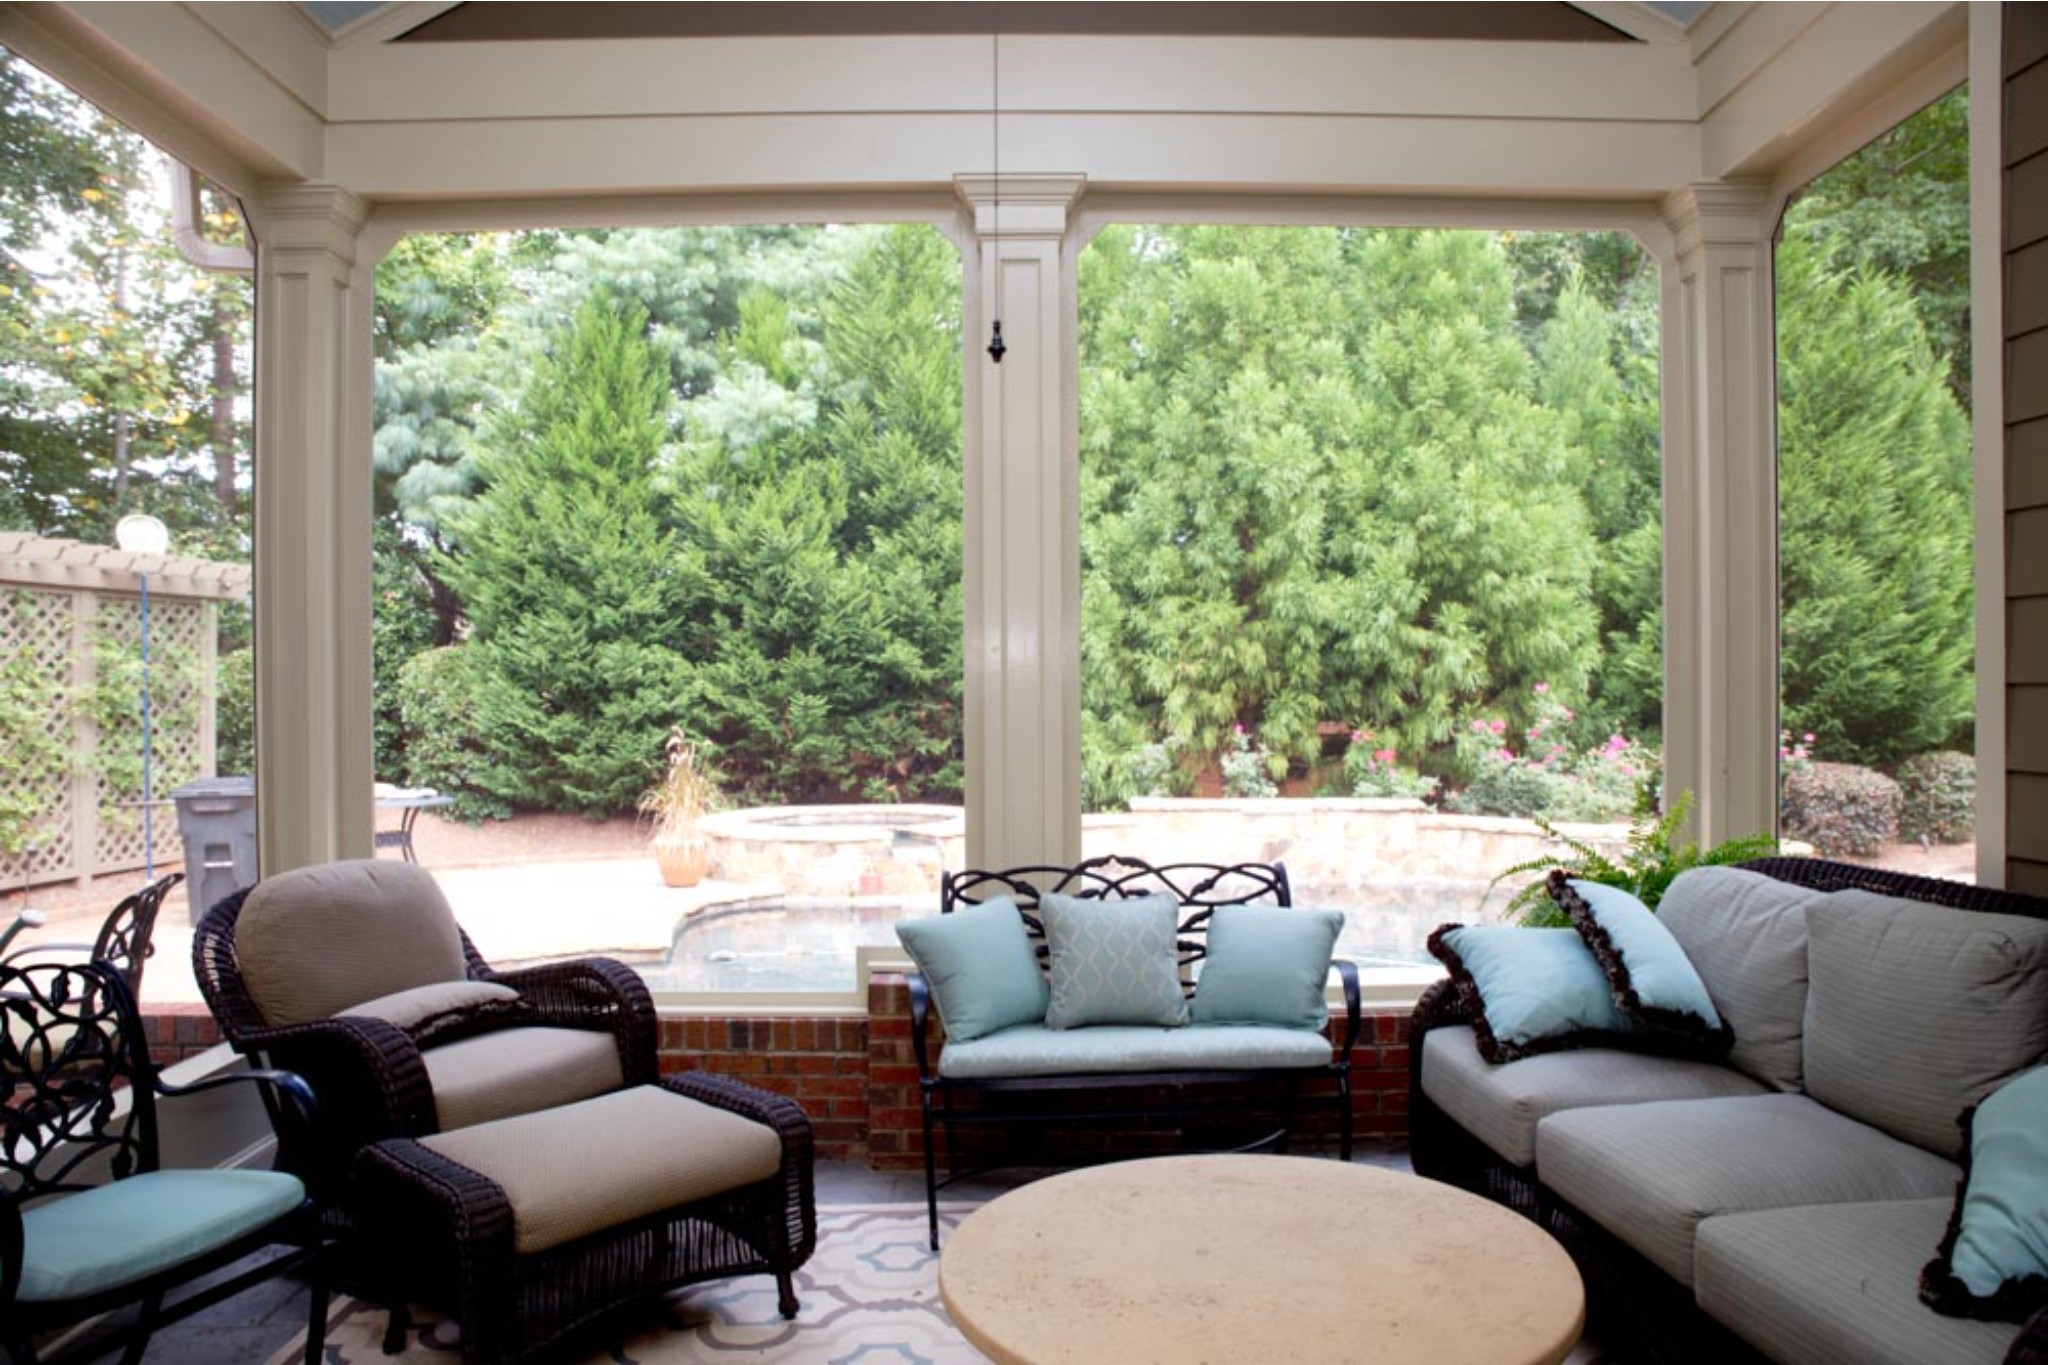 Sun porch with large windows looking facing the trees in the backyard